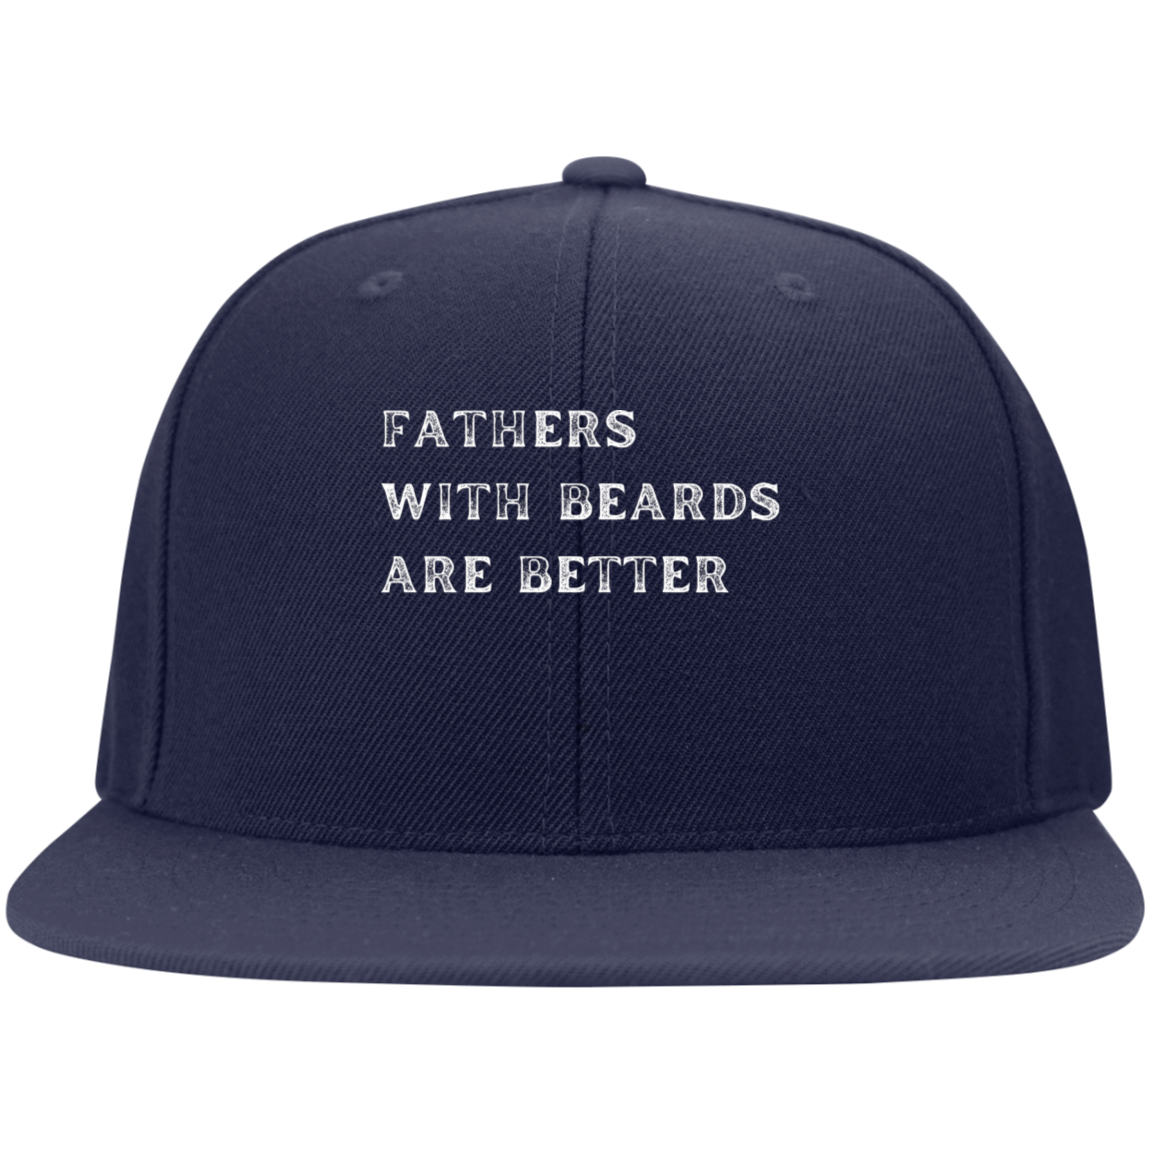 FATHERS WITH BEARDS ARE BETTER Flat Bill High-Profile Snapback Hat